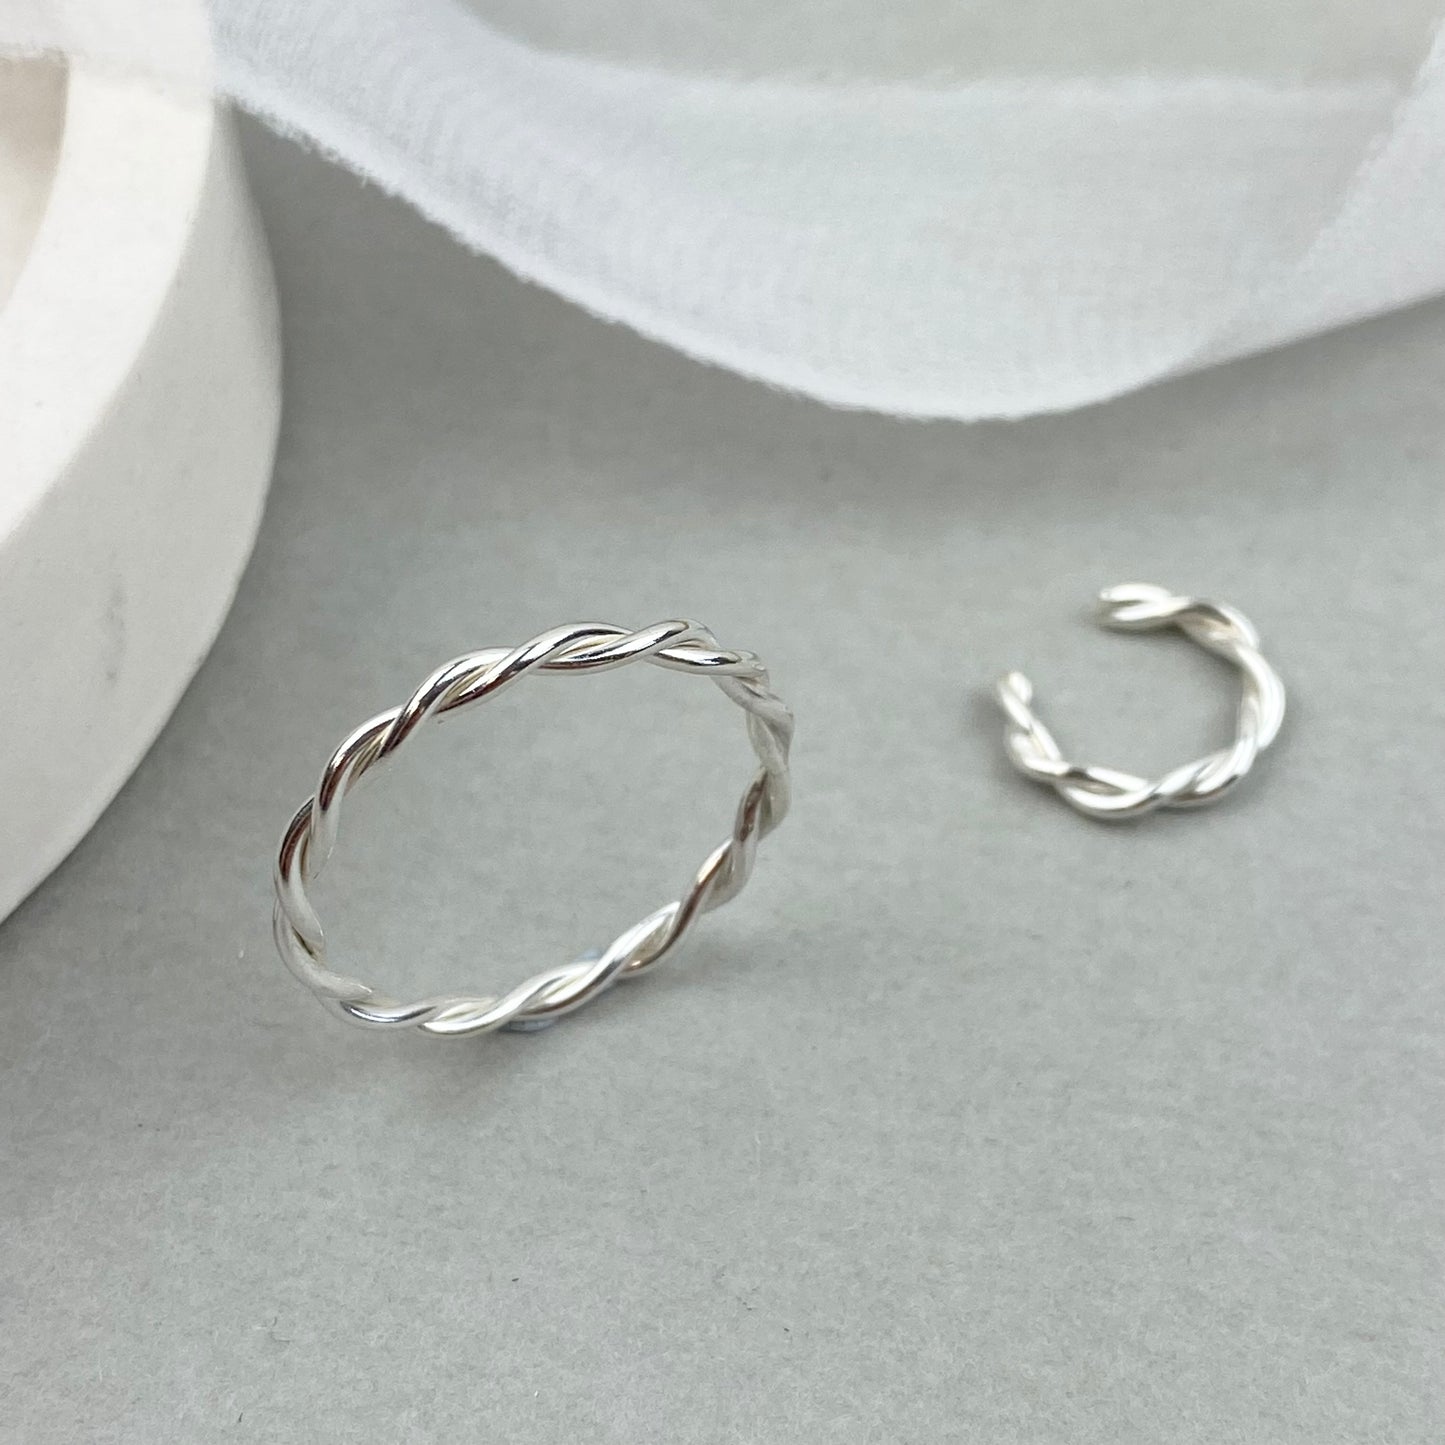 The Farthing Ear Cuffs - twisted Sterling Silver no-piercing earring